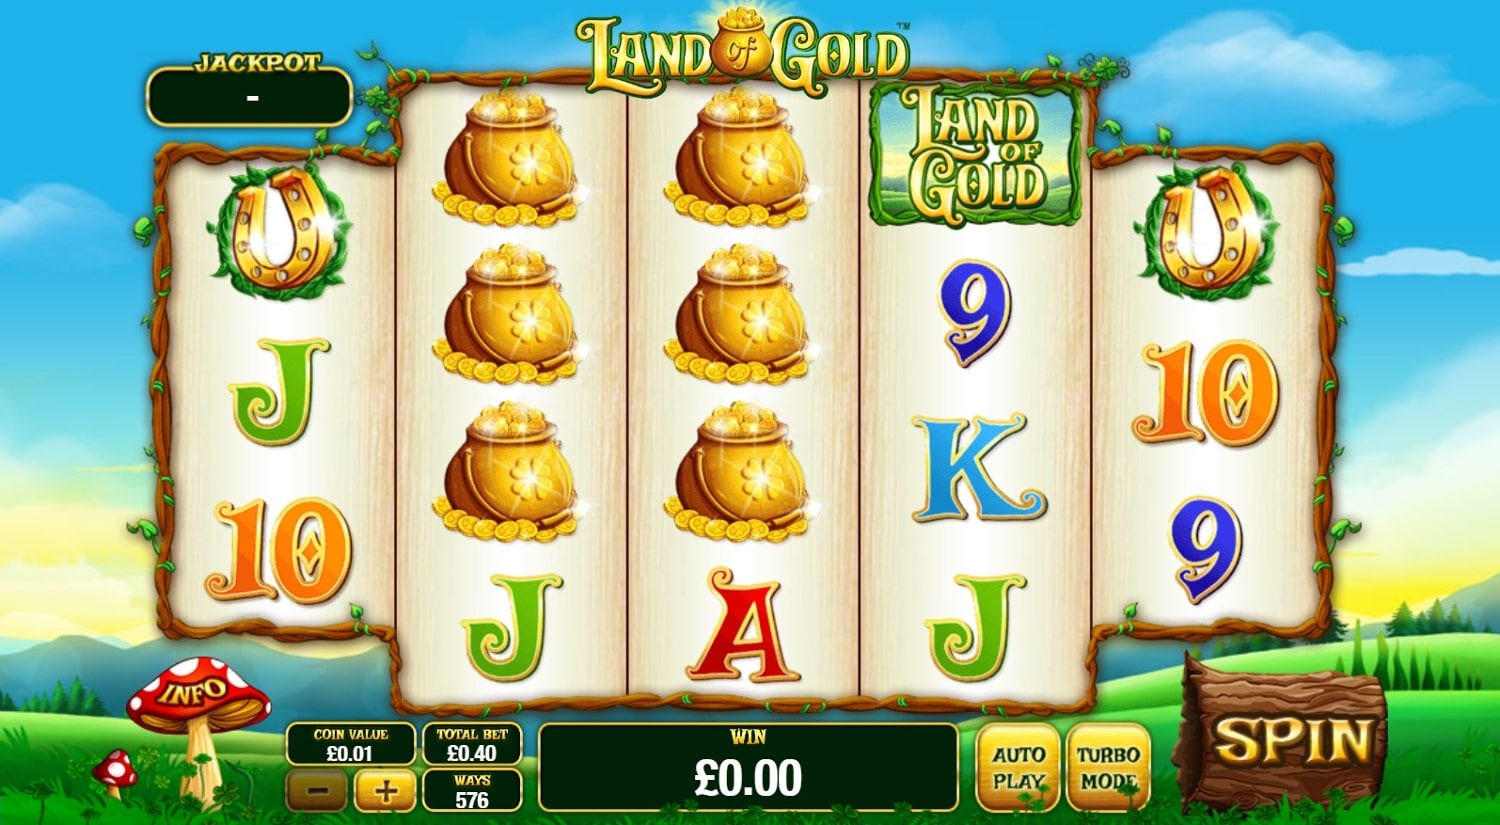 Land of Gold Free Spins